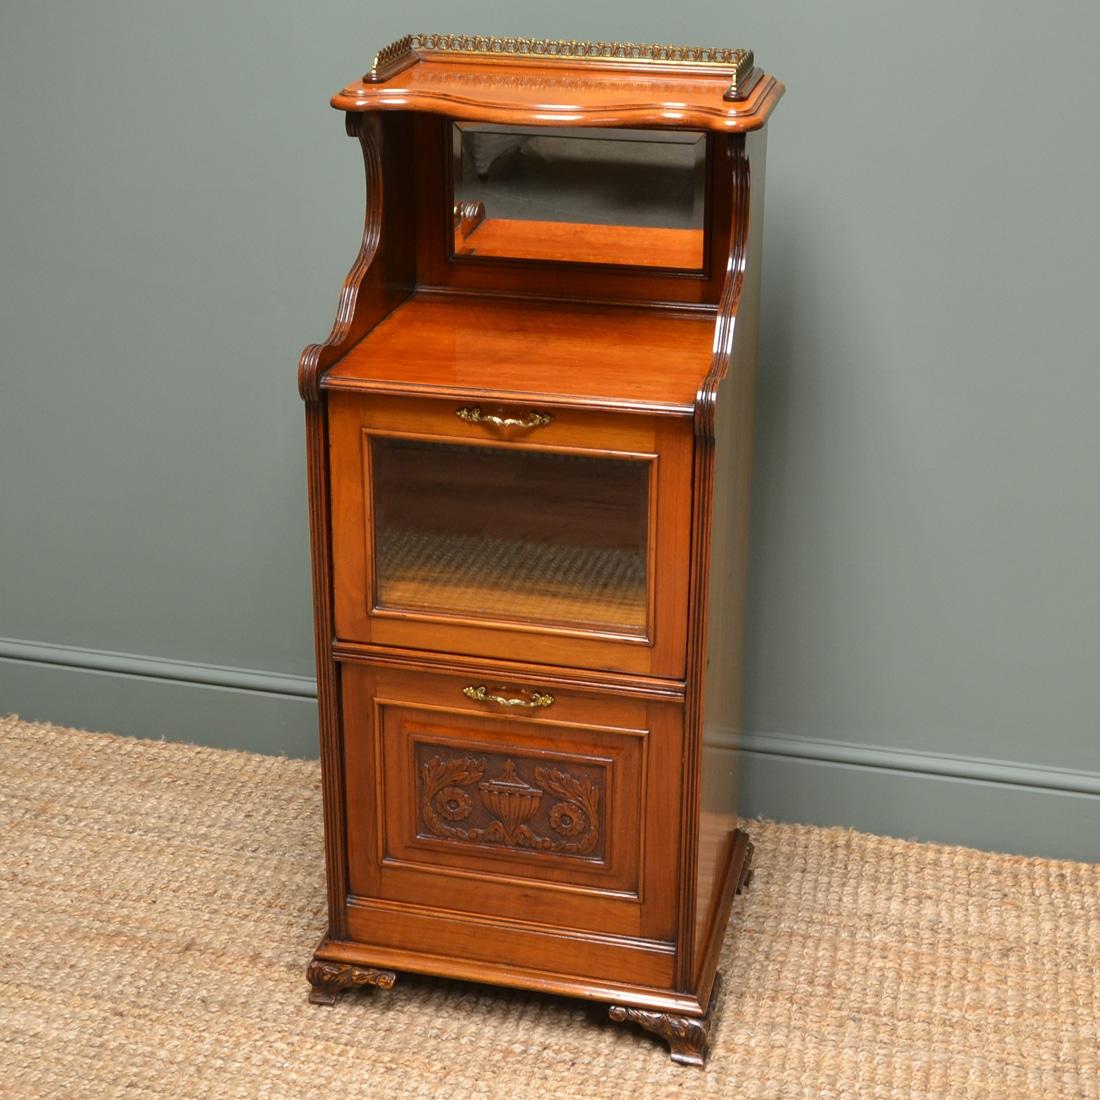 Victorian walnut antique side cabinet
This beautiful late 19th century Victorian walnut antique side Music cabinet dates from ca. 1890 and has a shaped moulded top with brass gallery above shaped sides, the original bevelled mirrored back, a glazed